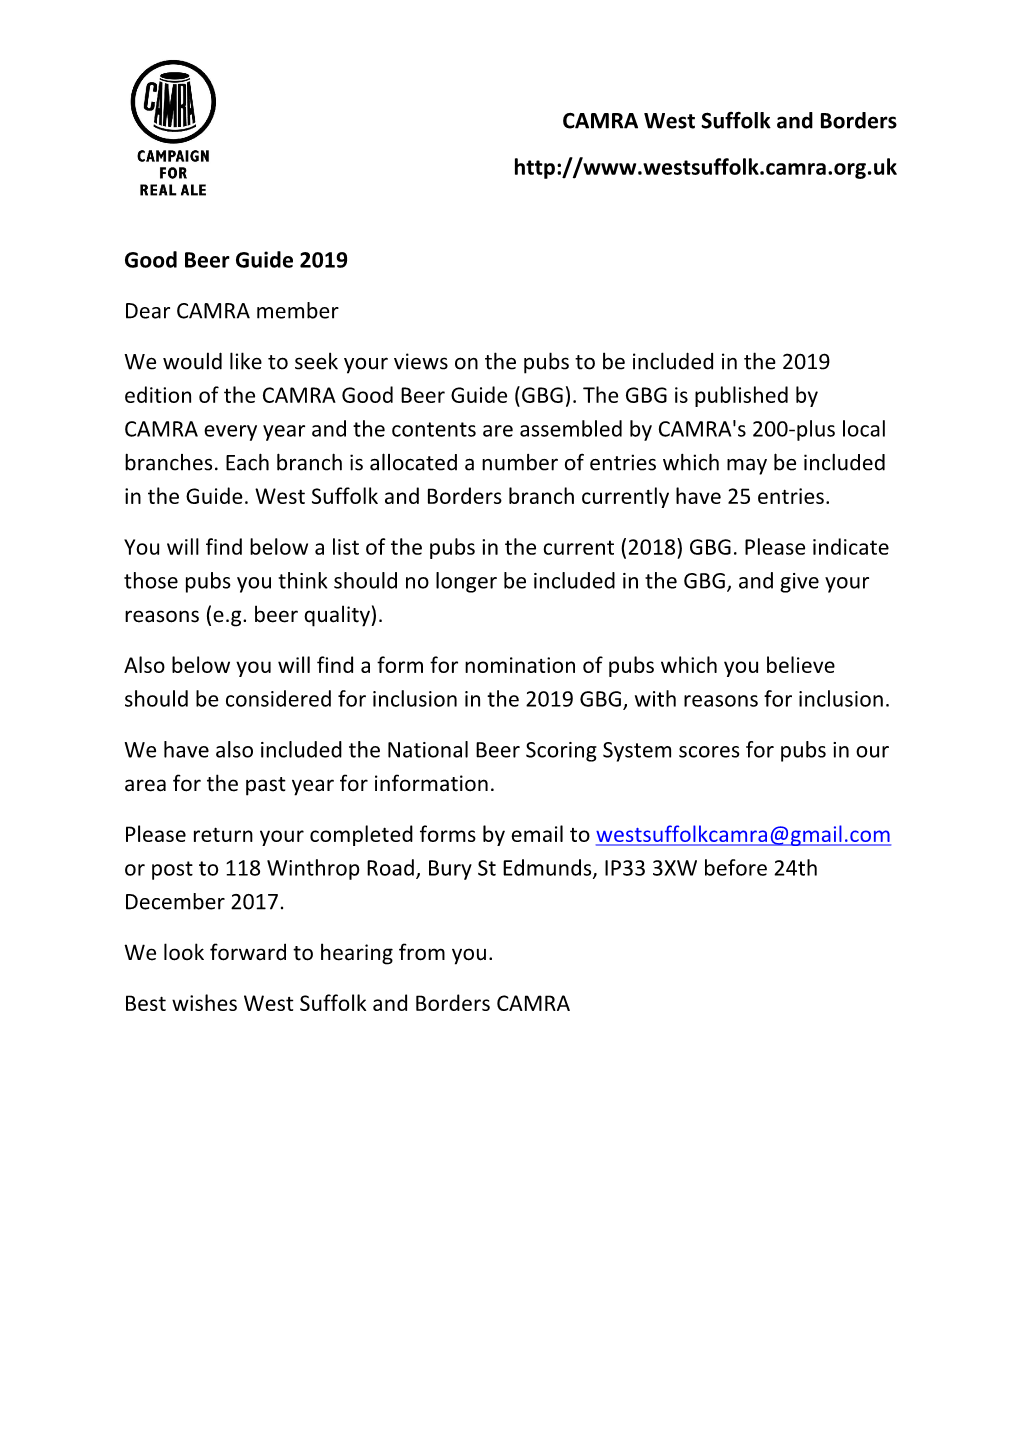 CAMRA West Suffolk and Borders Good Beer Guide 2019 Dear CAMRA Member We Would Like to Seek